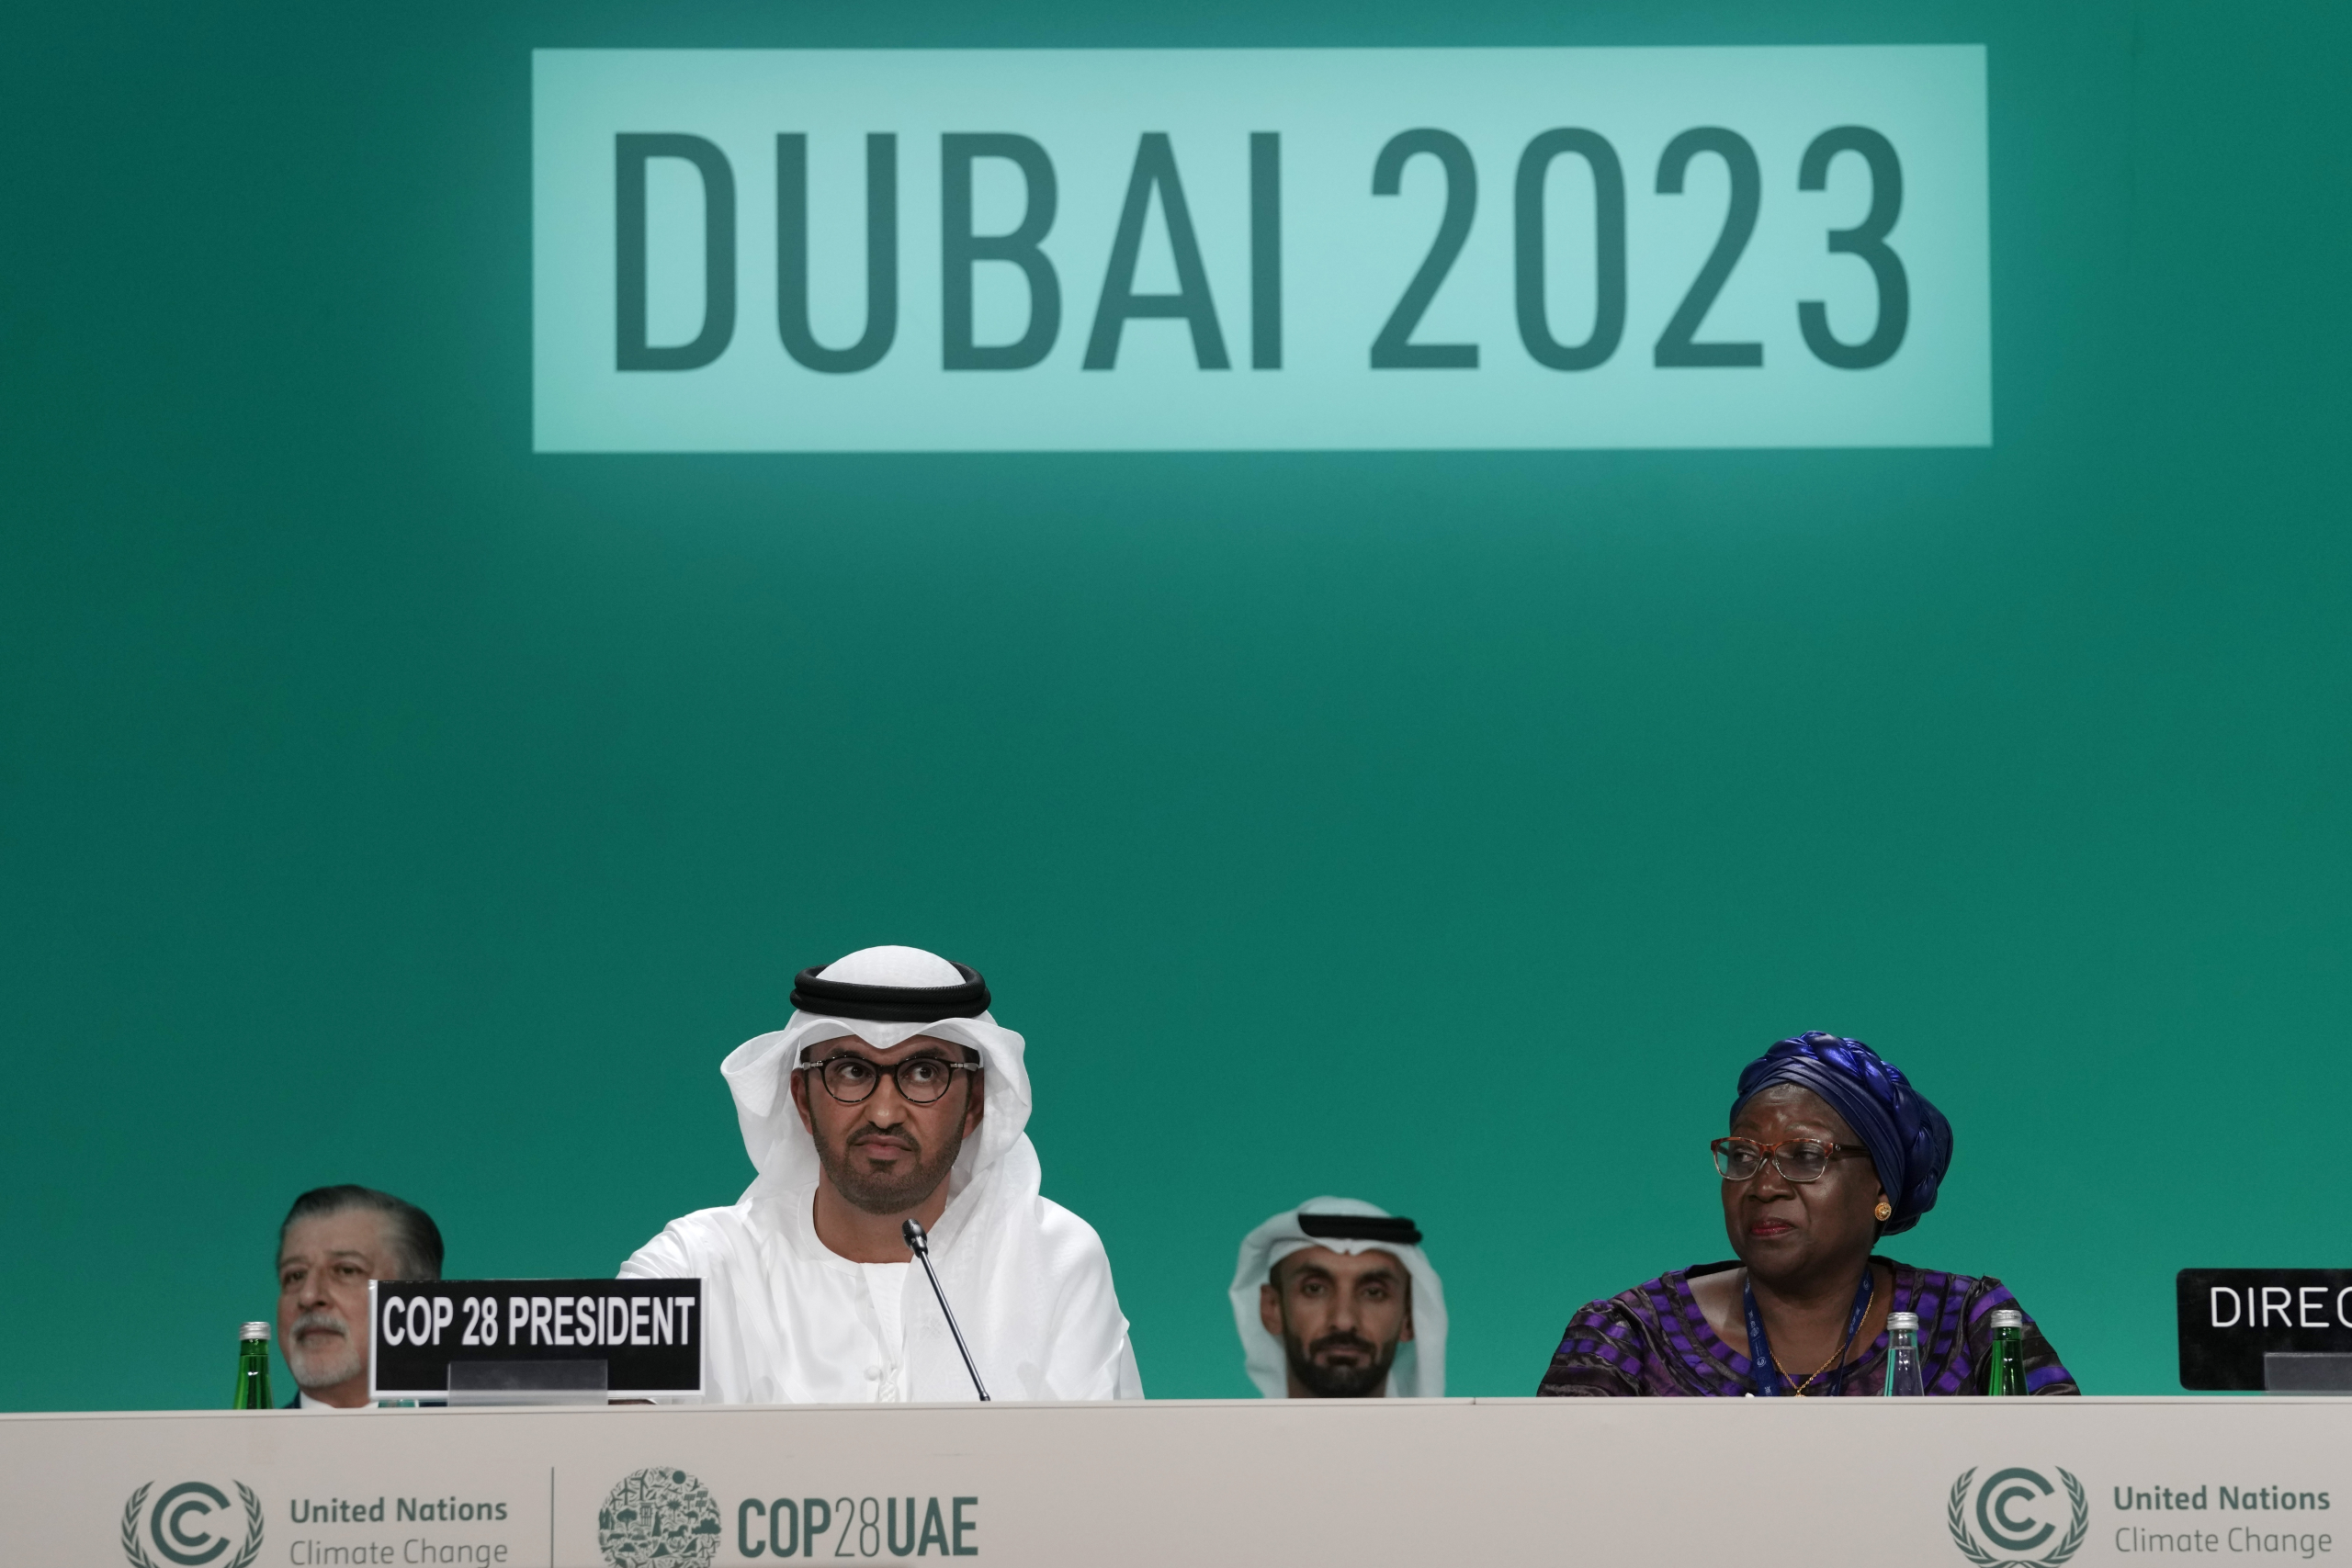 COP28 President Sultan al-Jaber, left, attends the opening session at the COP28 U.N. Climate Summit, Thursday, Nov. 30, 2023, in Dubai, United Arab Emirates. (AP Photo/Peter Dejong)

Associated Press/LaPresse
Only Italy and Spain